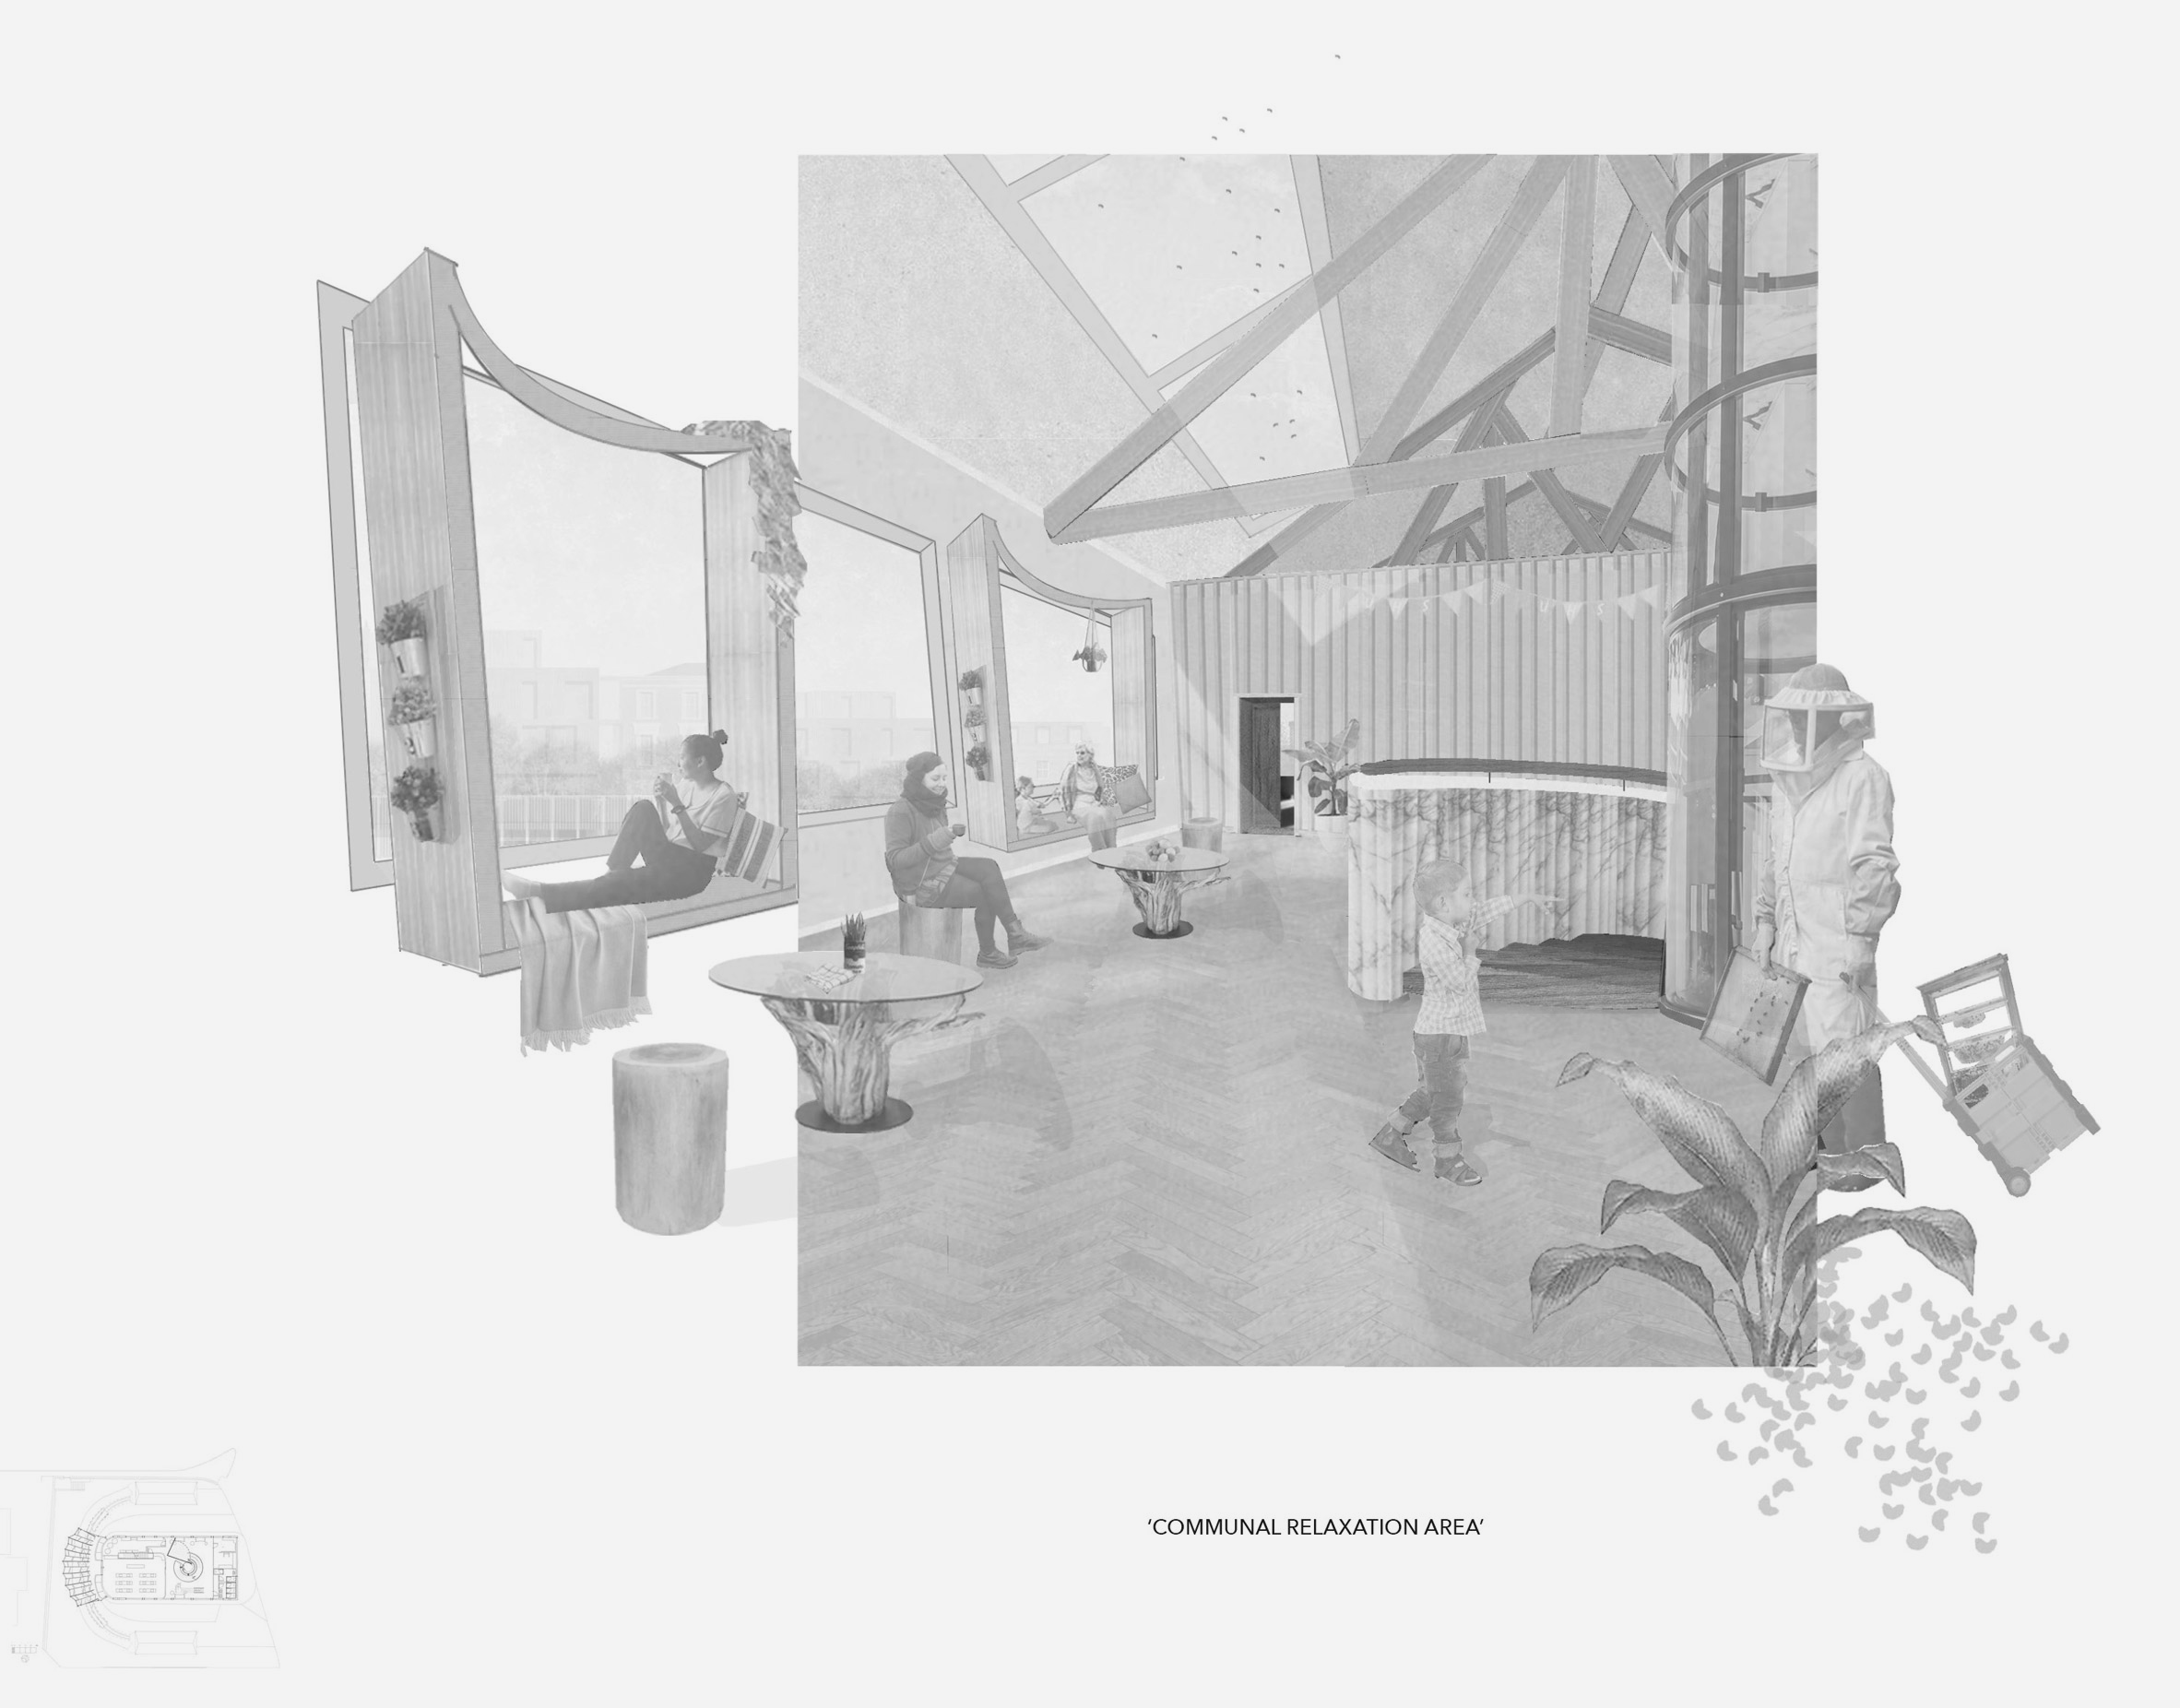 Perspective collage of a communal relaxation area in a culinary facility.